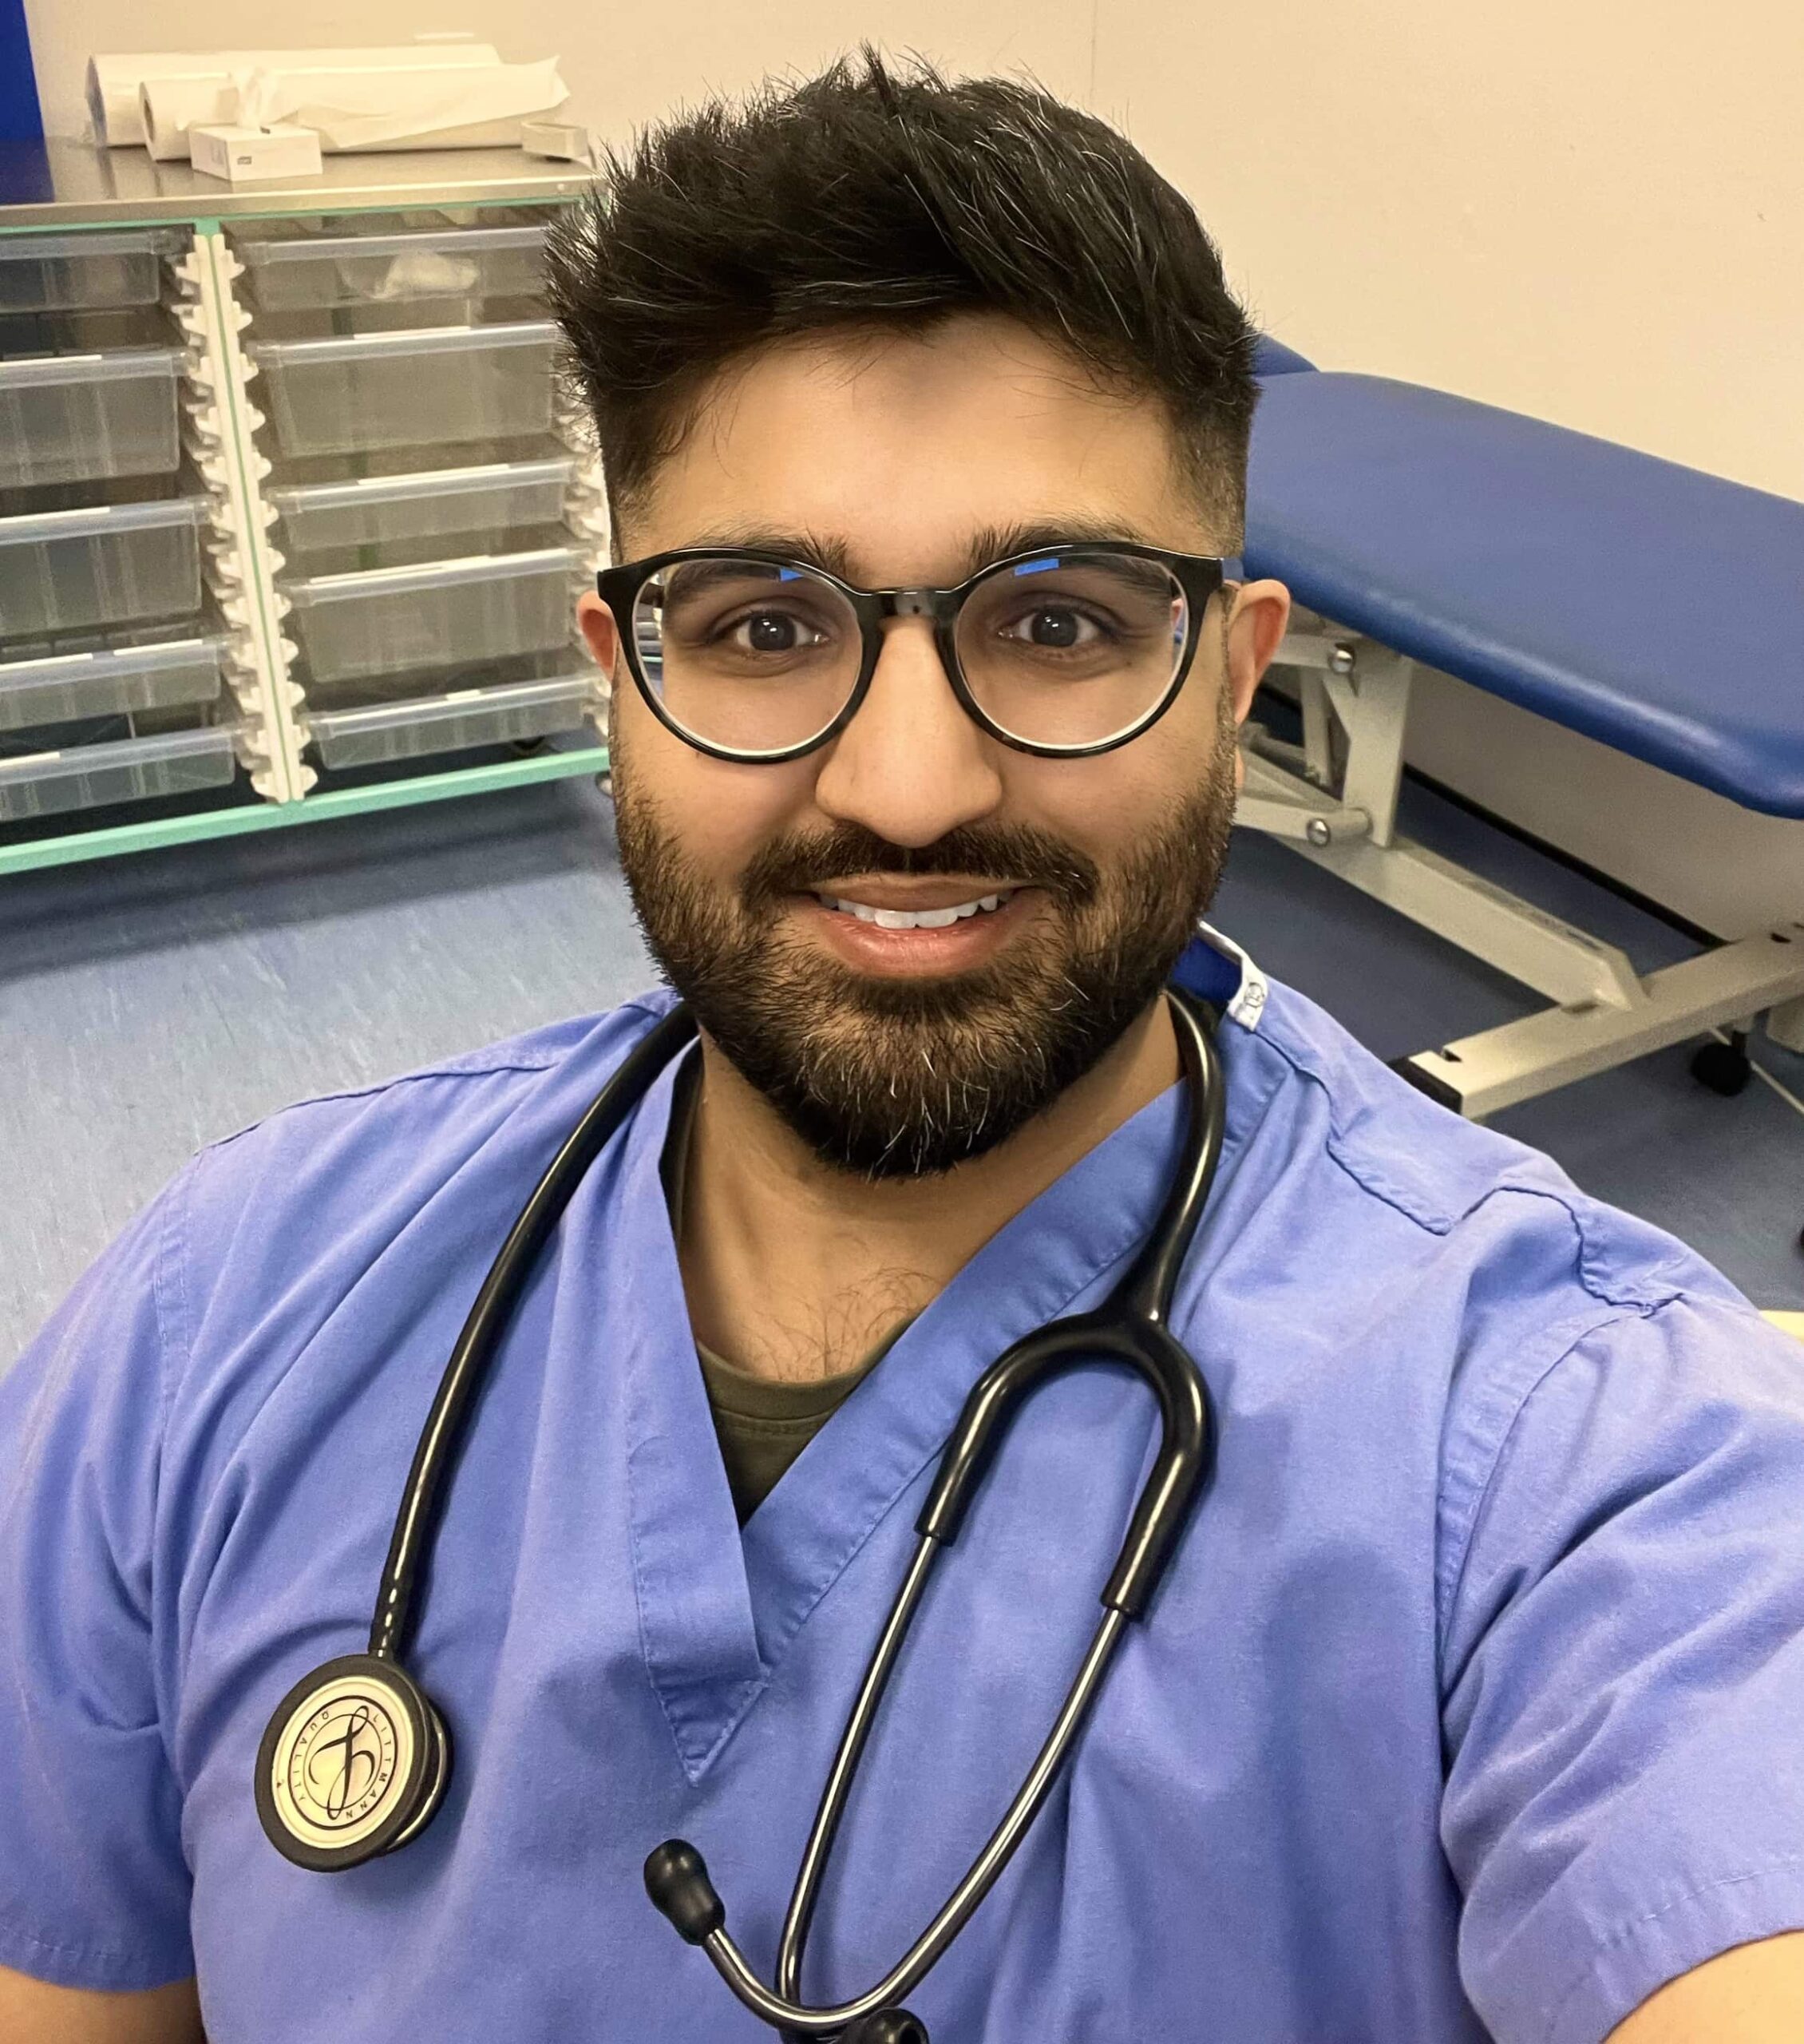 NHS GP's TikTok warning on proper genital hygiene for men goes viral, highlighting risks of balanitis. Advice includes daily washing with mild soap, drying thoroughly to prevent infections.